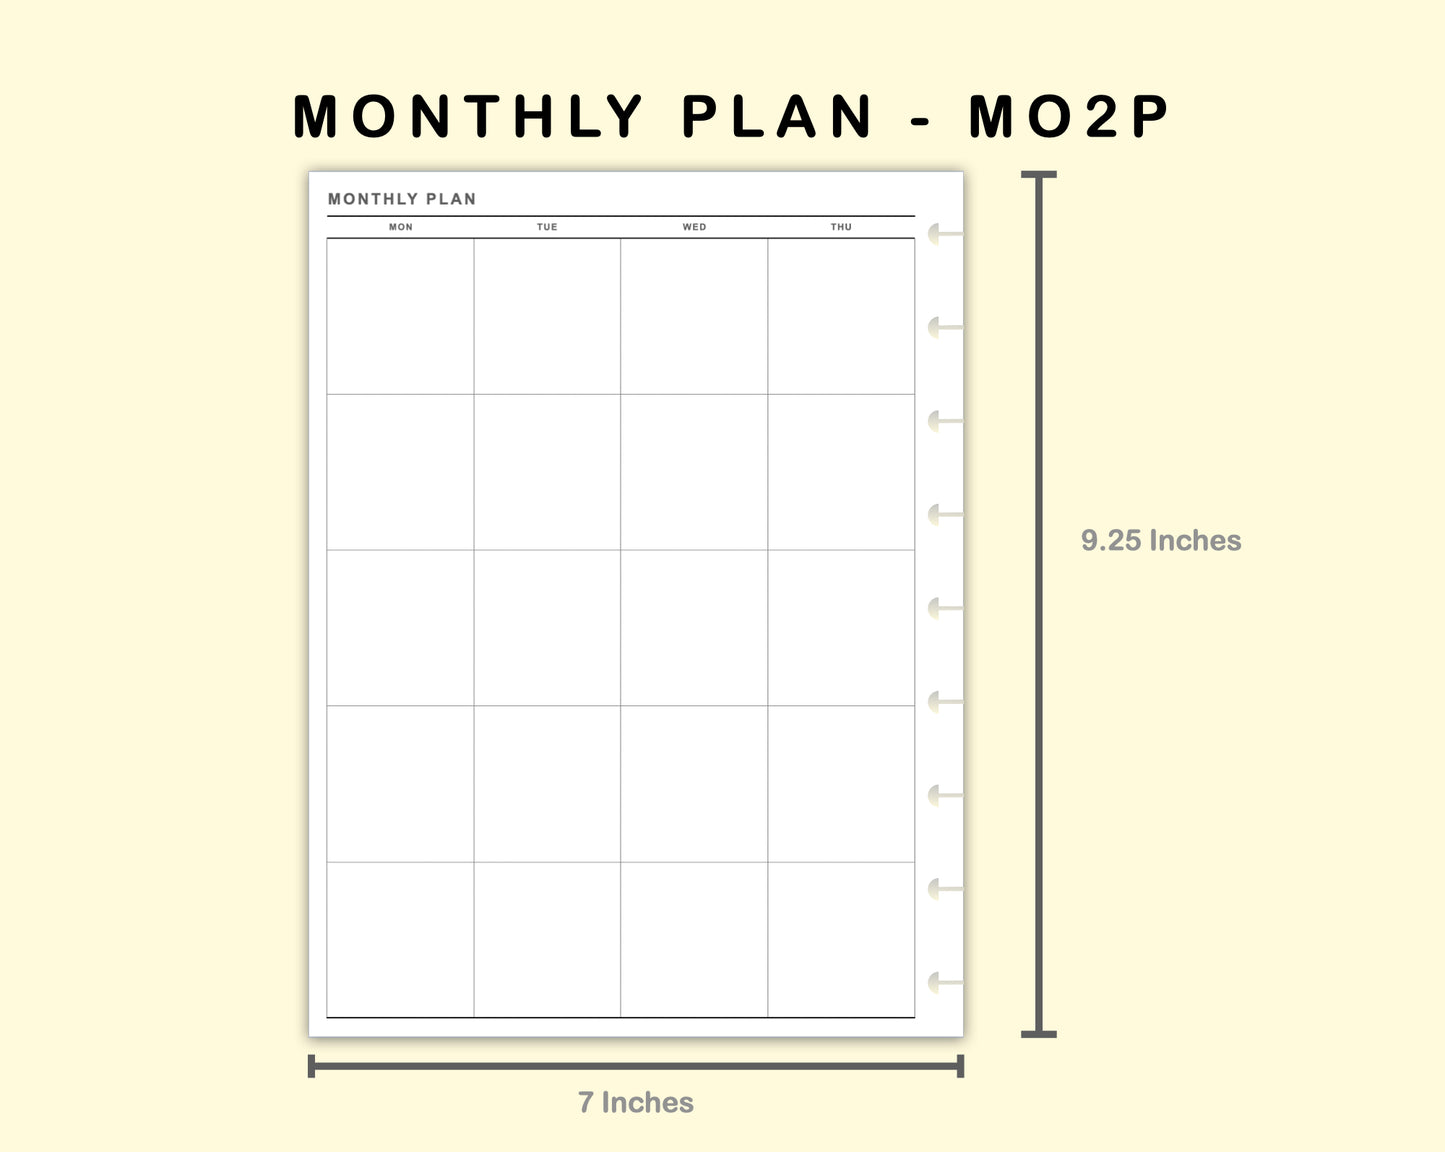 Classic HP Inserts - Monthly Plan - MO2P